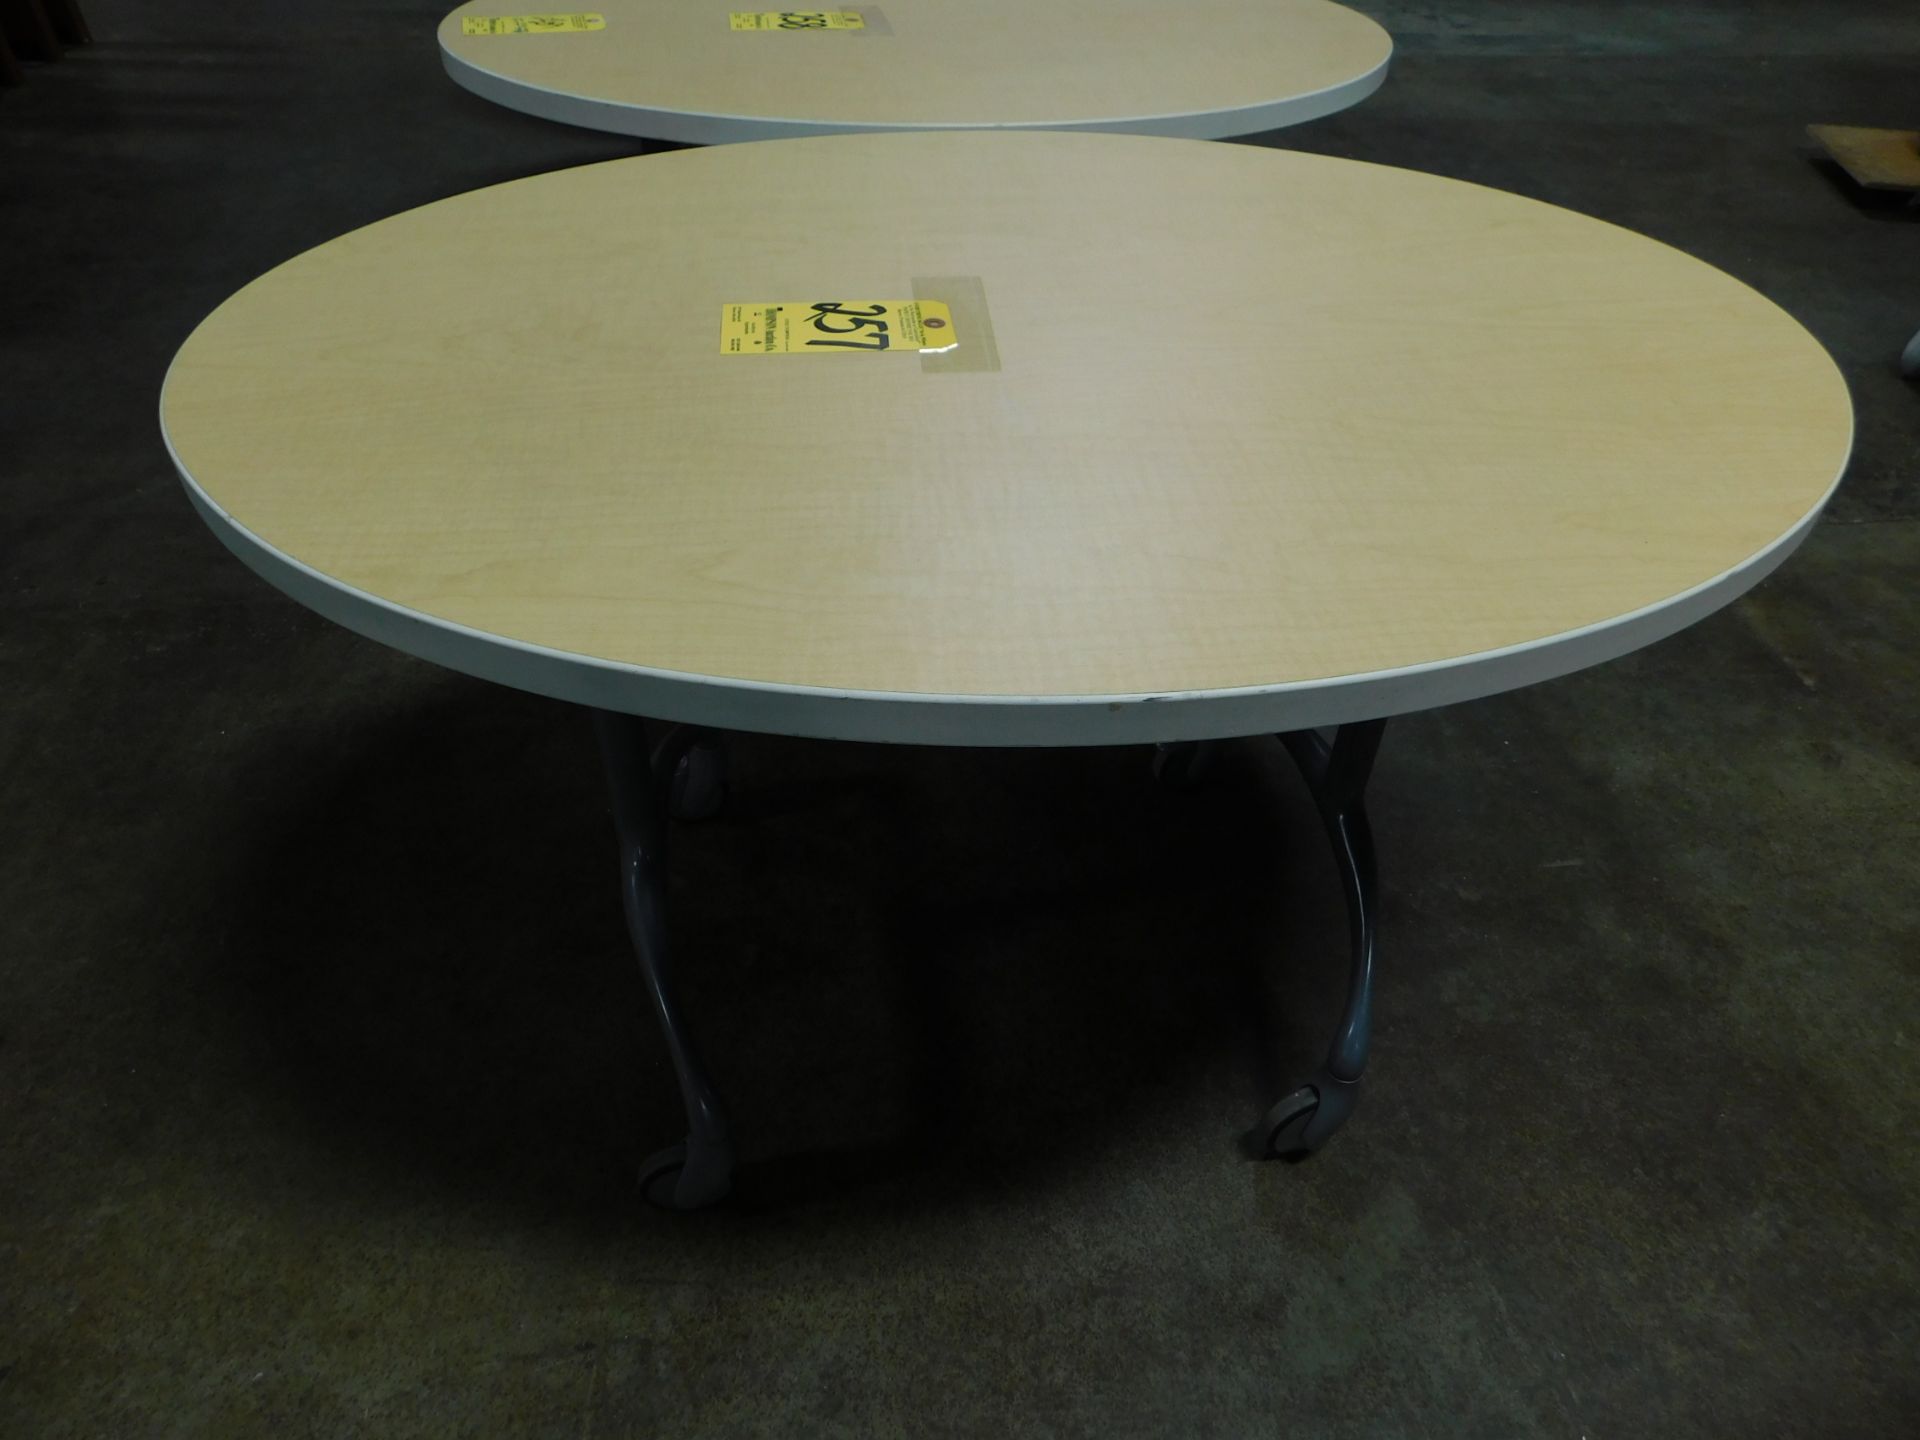 Steelcase Adjustable Height Oval Table on Casters, 42" x 30"